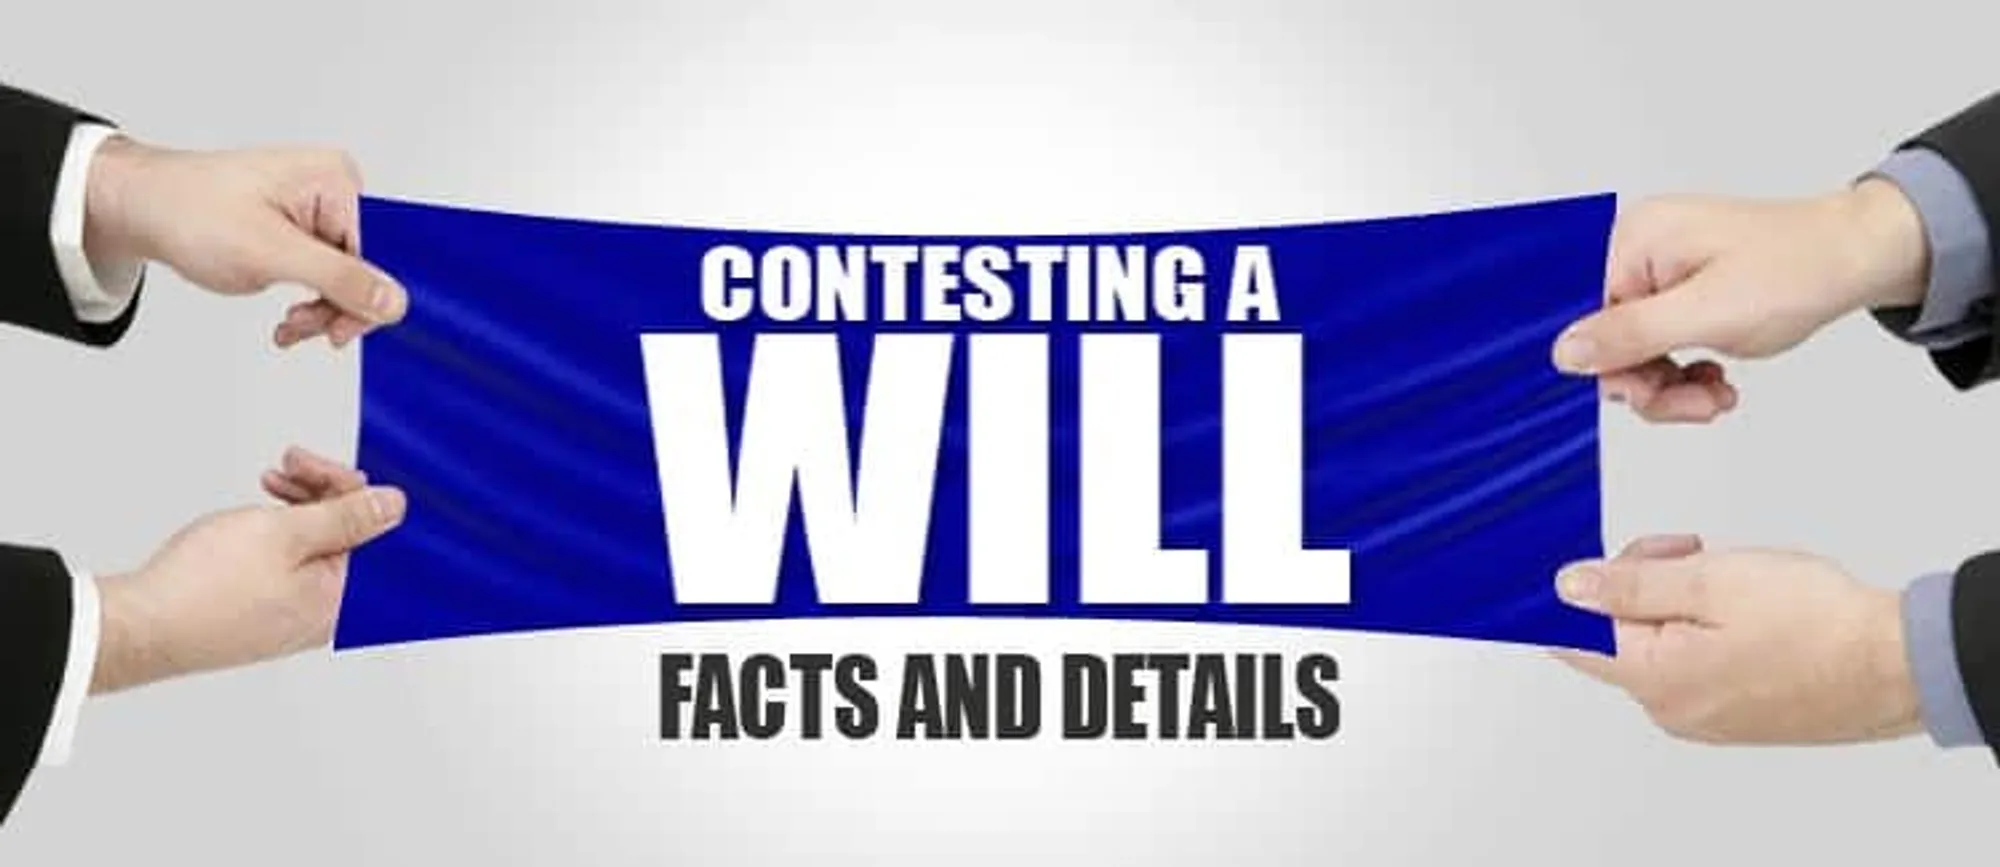 Contesting a Will – facts and details